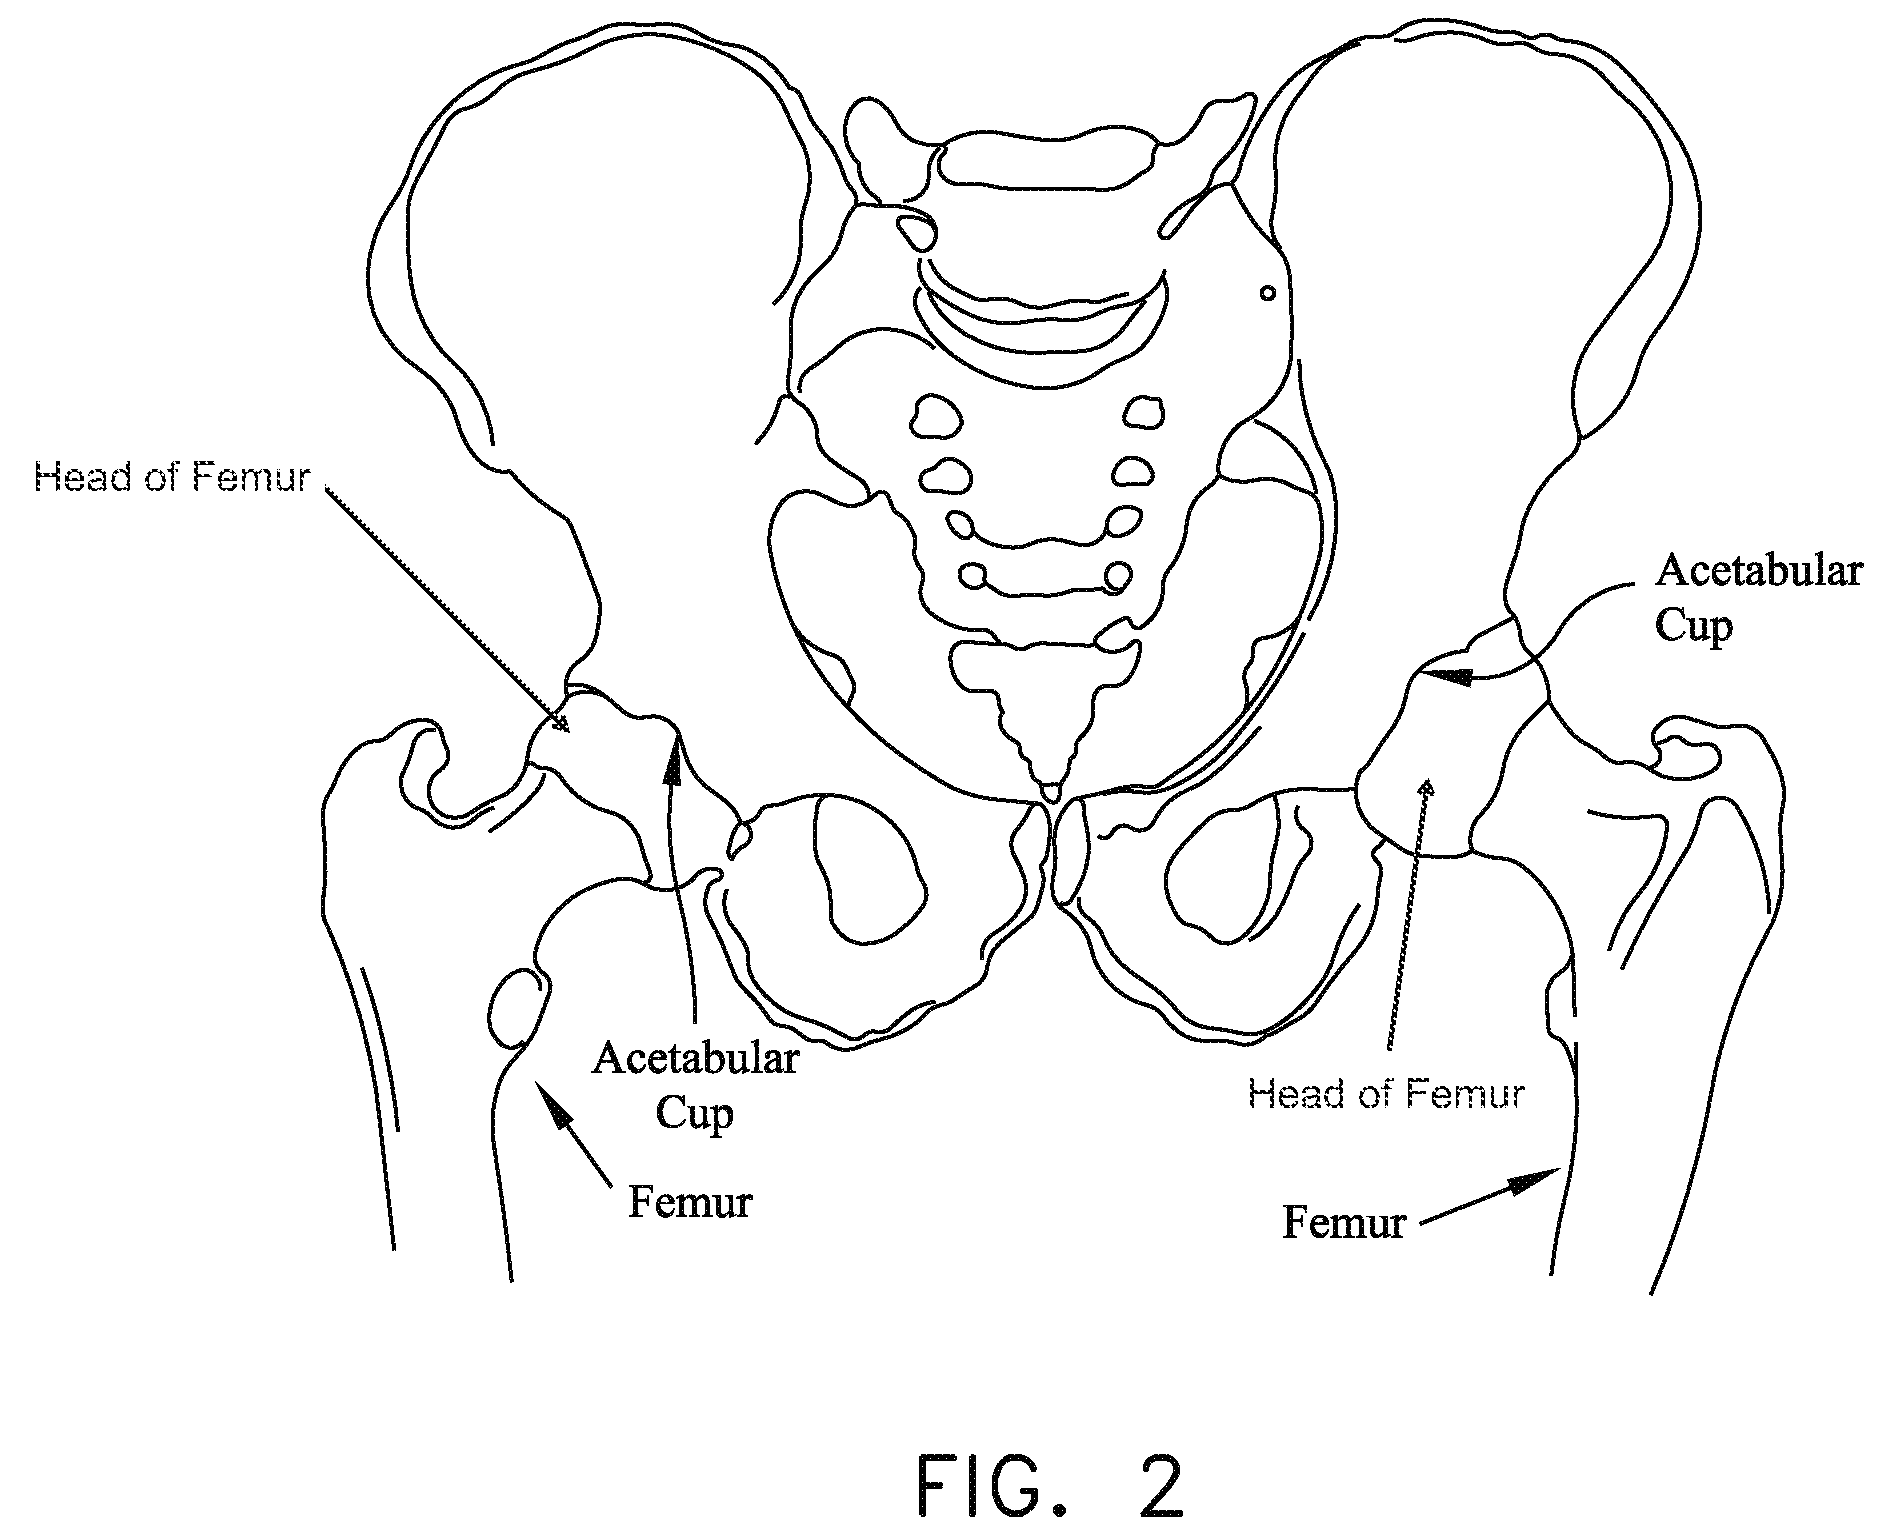 Method and apparatus for distracting a joint, including the provision and use of a novel fluid joint spacer